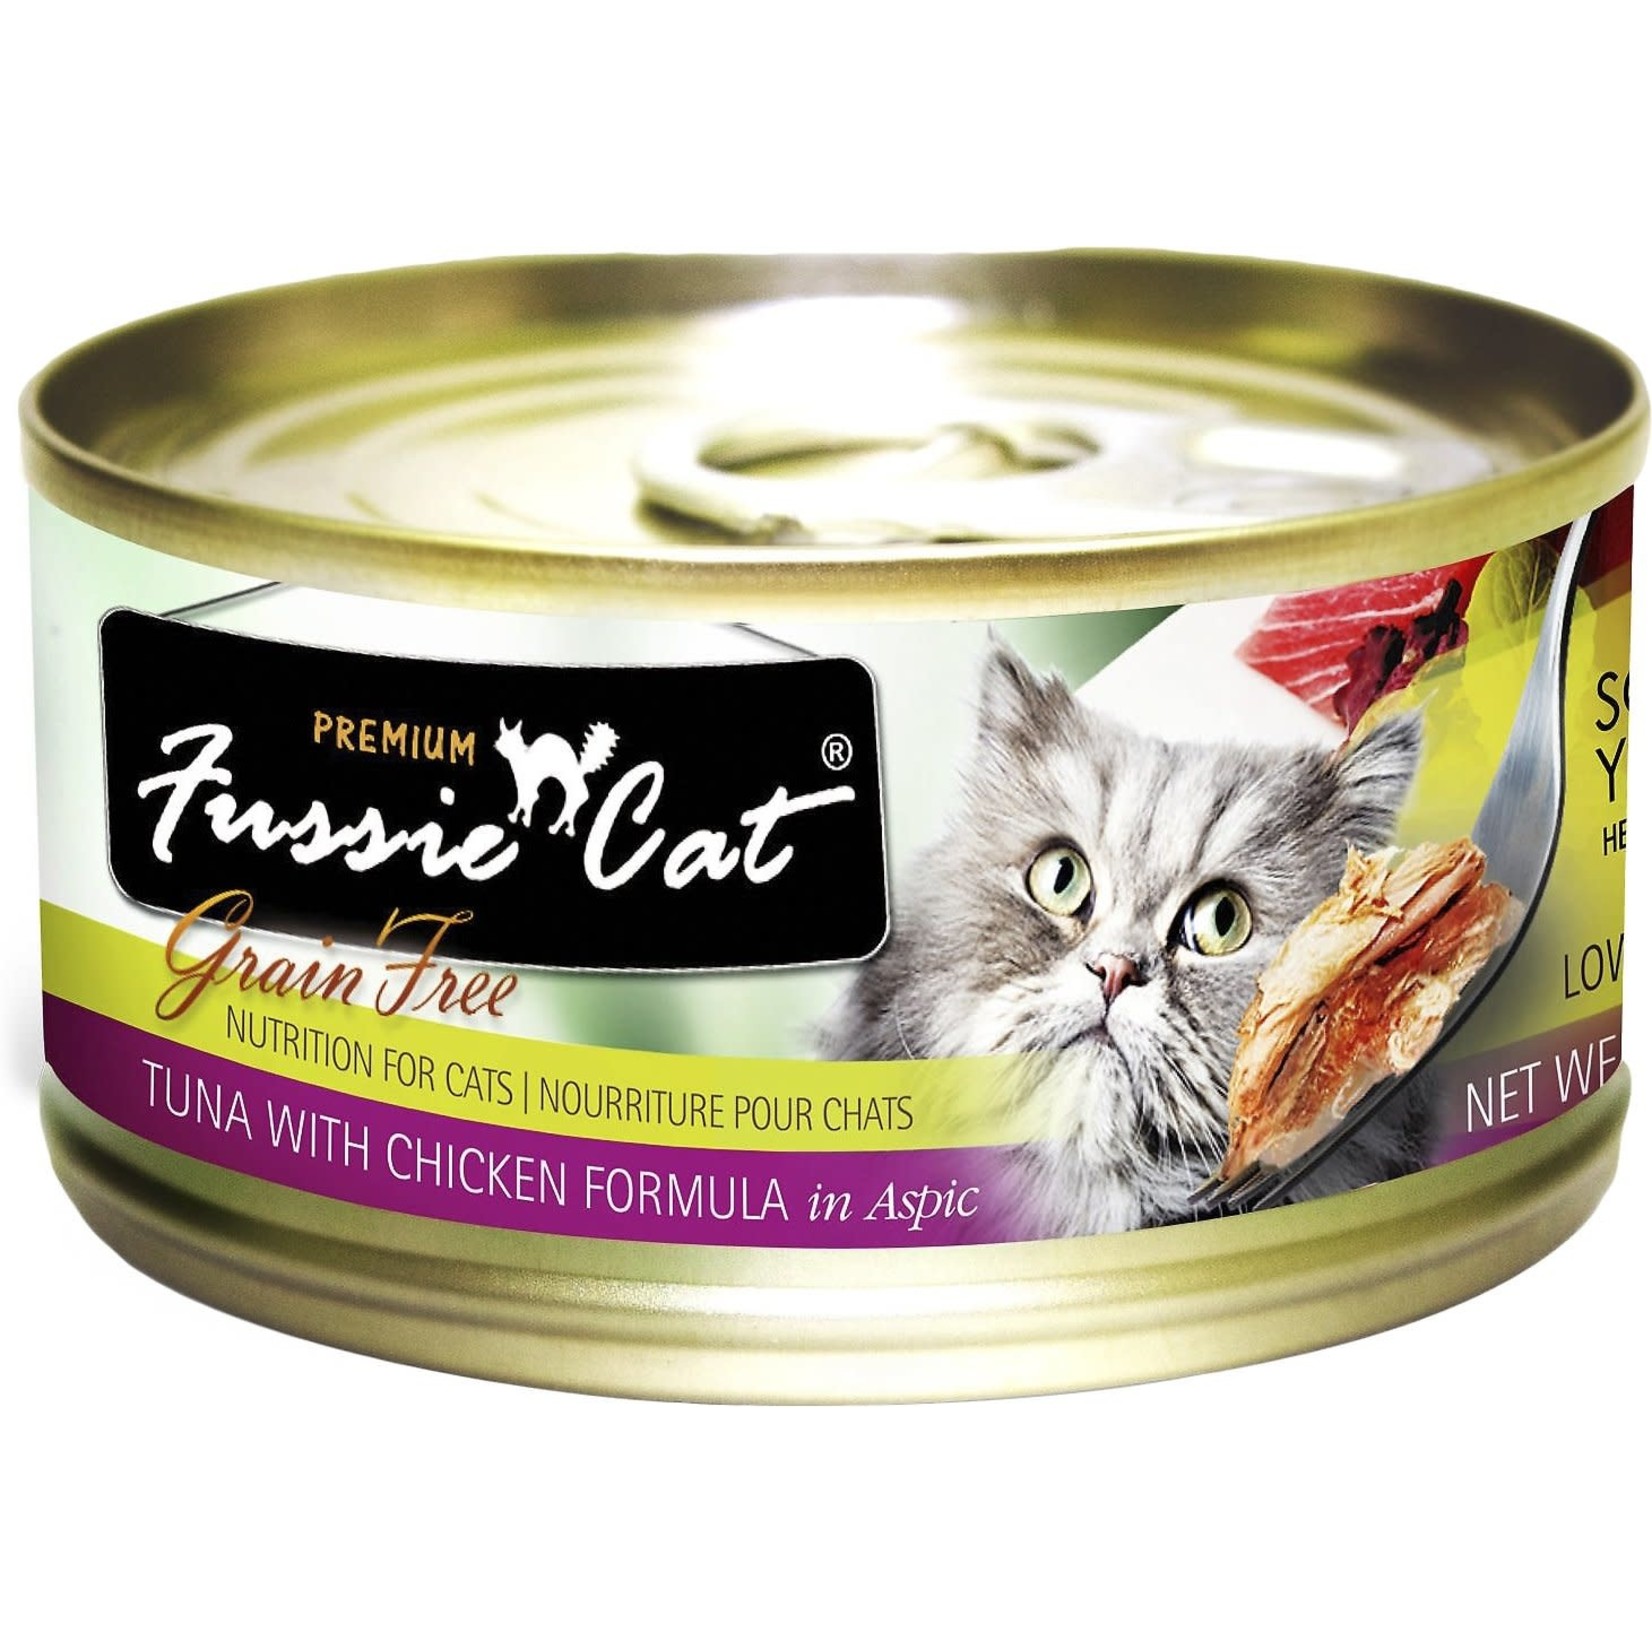 Fussie Cat Fussie Cat Tuna With Chicken Canned Cat Food 2.82oz - Final Sale - No returns/exchanges